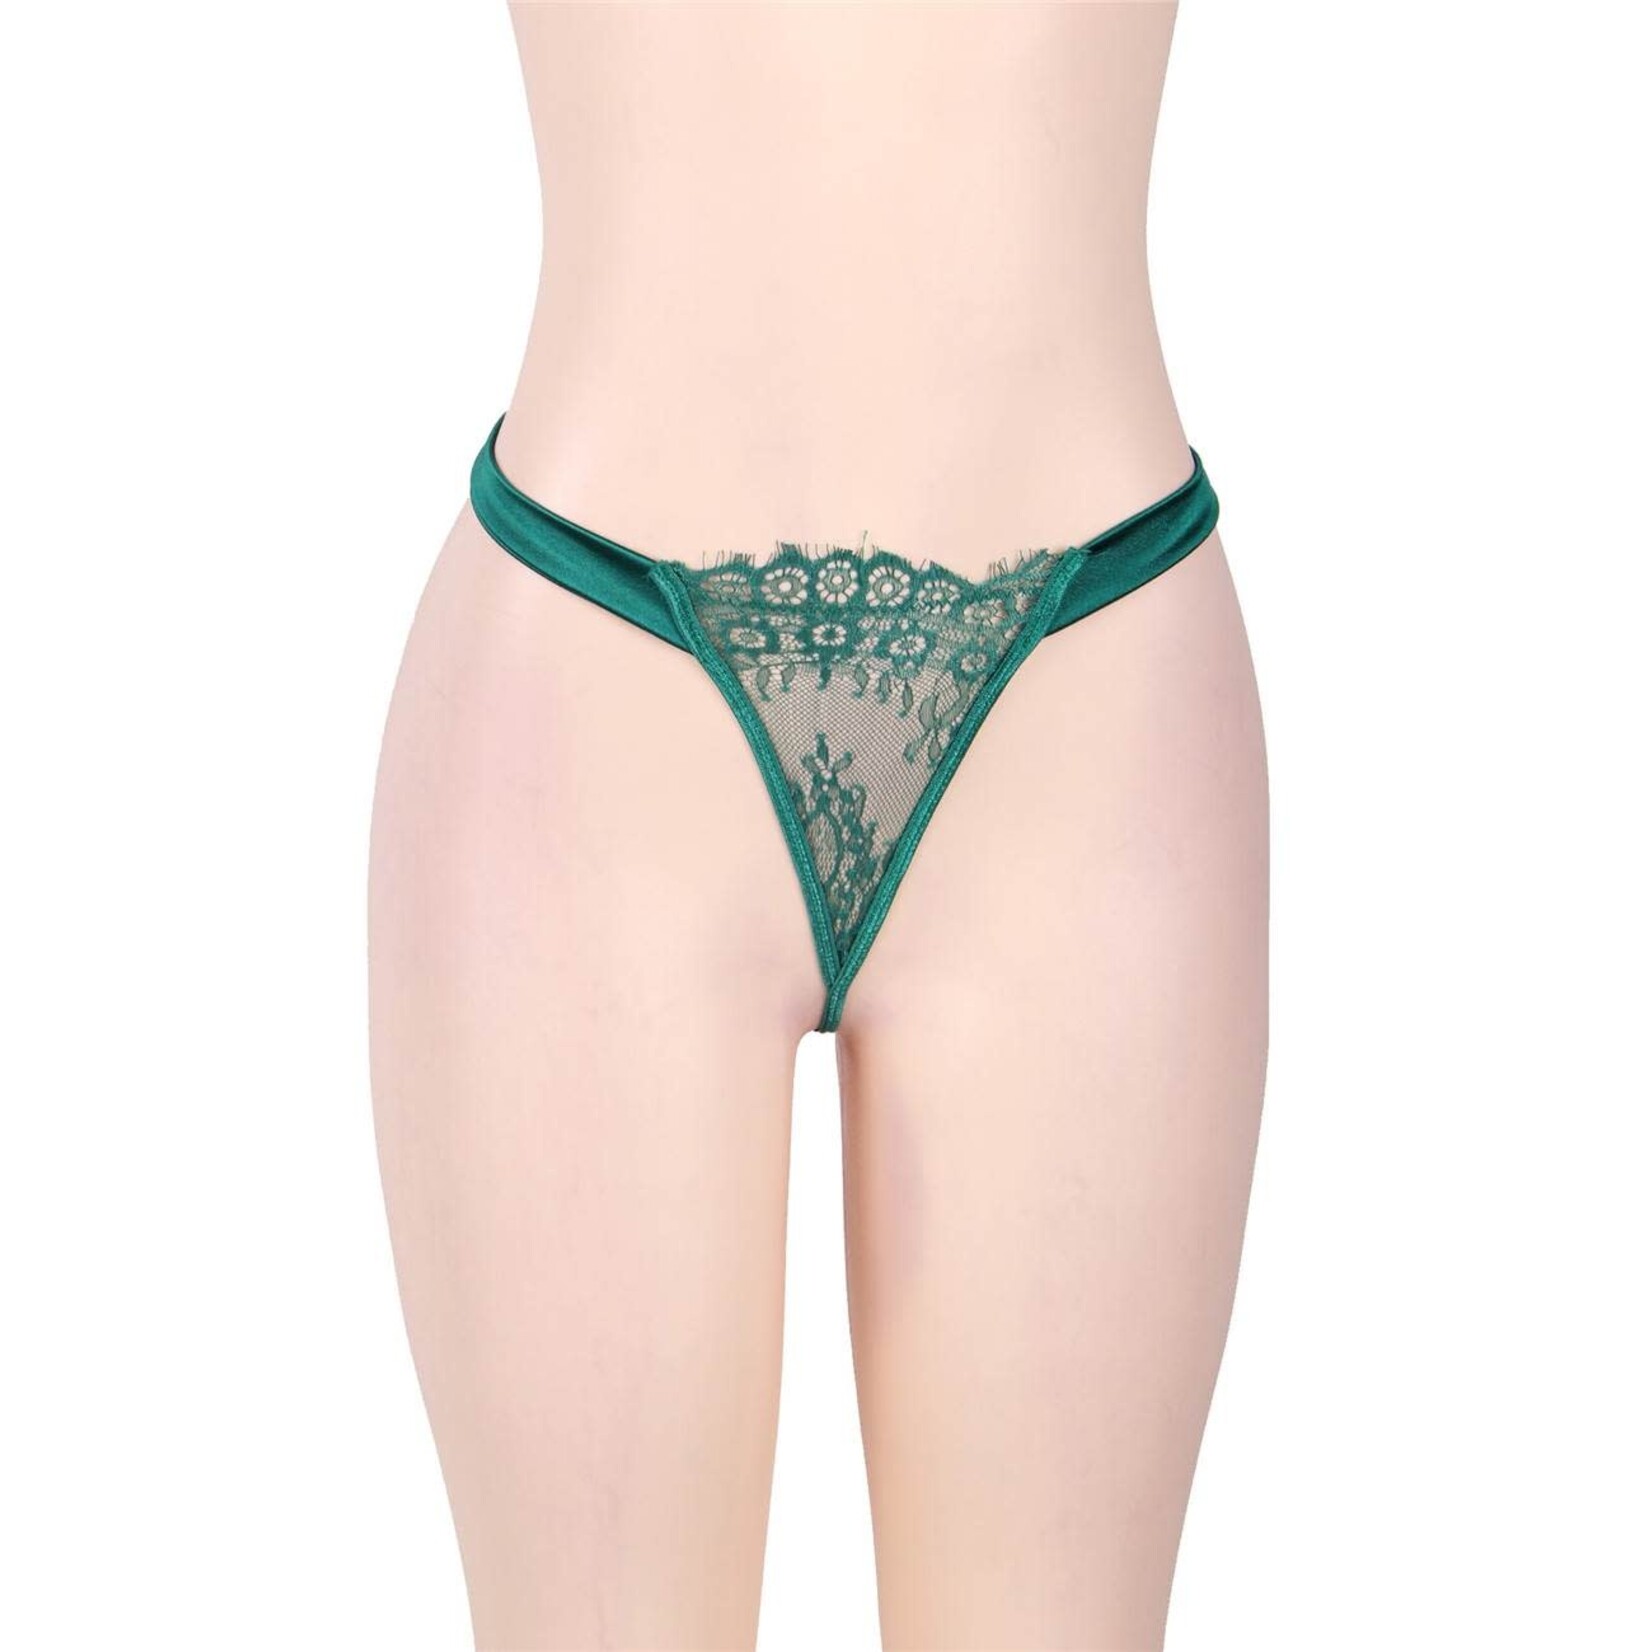 OH YEAH! -  ELEGANT EYELASH LACE PLUS SIZE GARTER GREEN LINGERIE WITH UNDERWIRE M-L